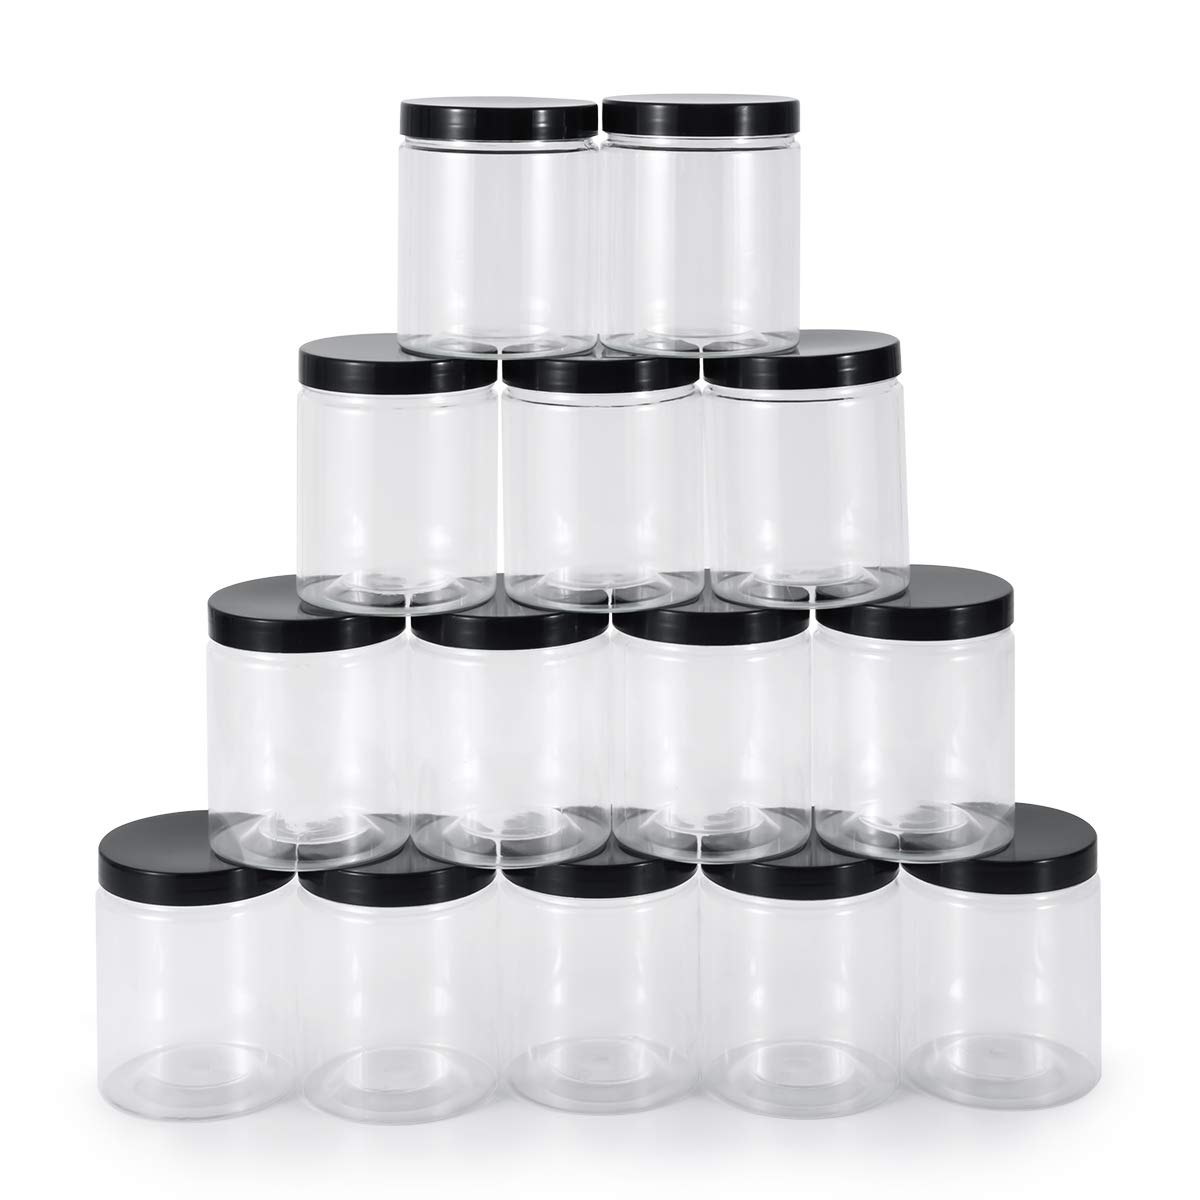 testyu Plastic Jars with Lids, 8 OZ Wide Mouth Jars with Airtight Lids